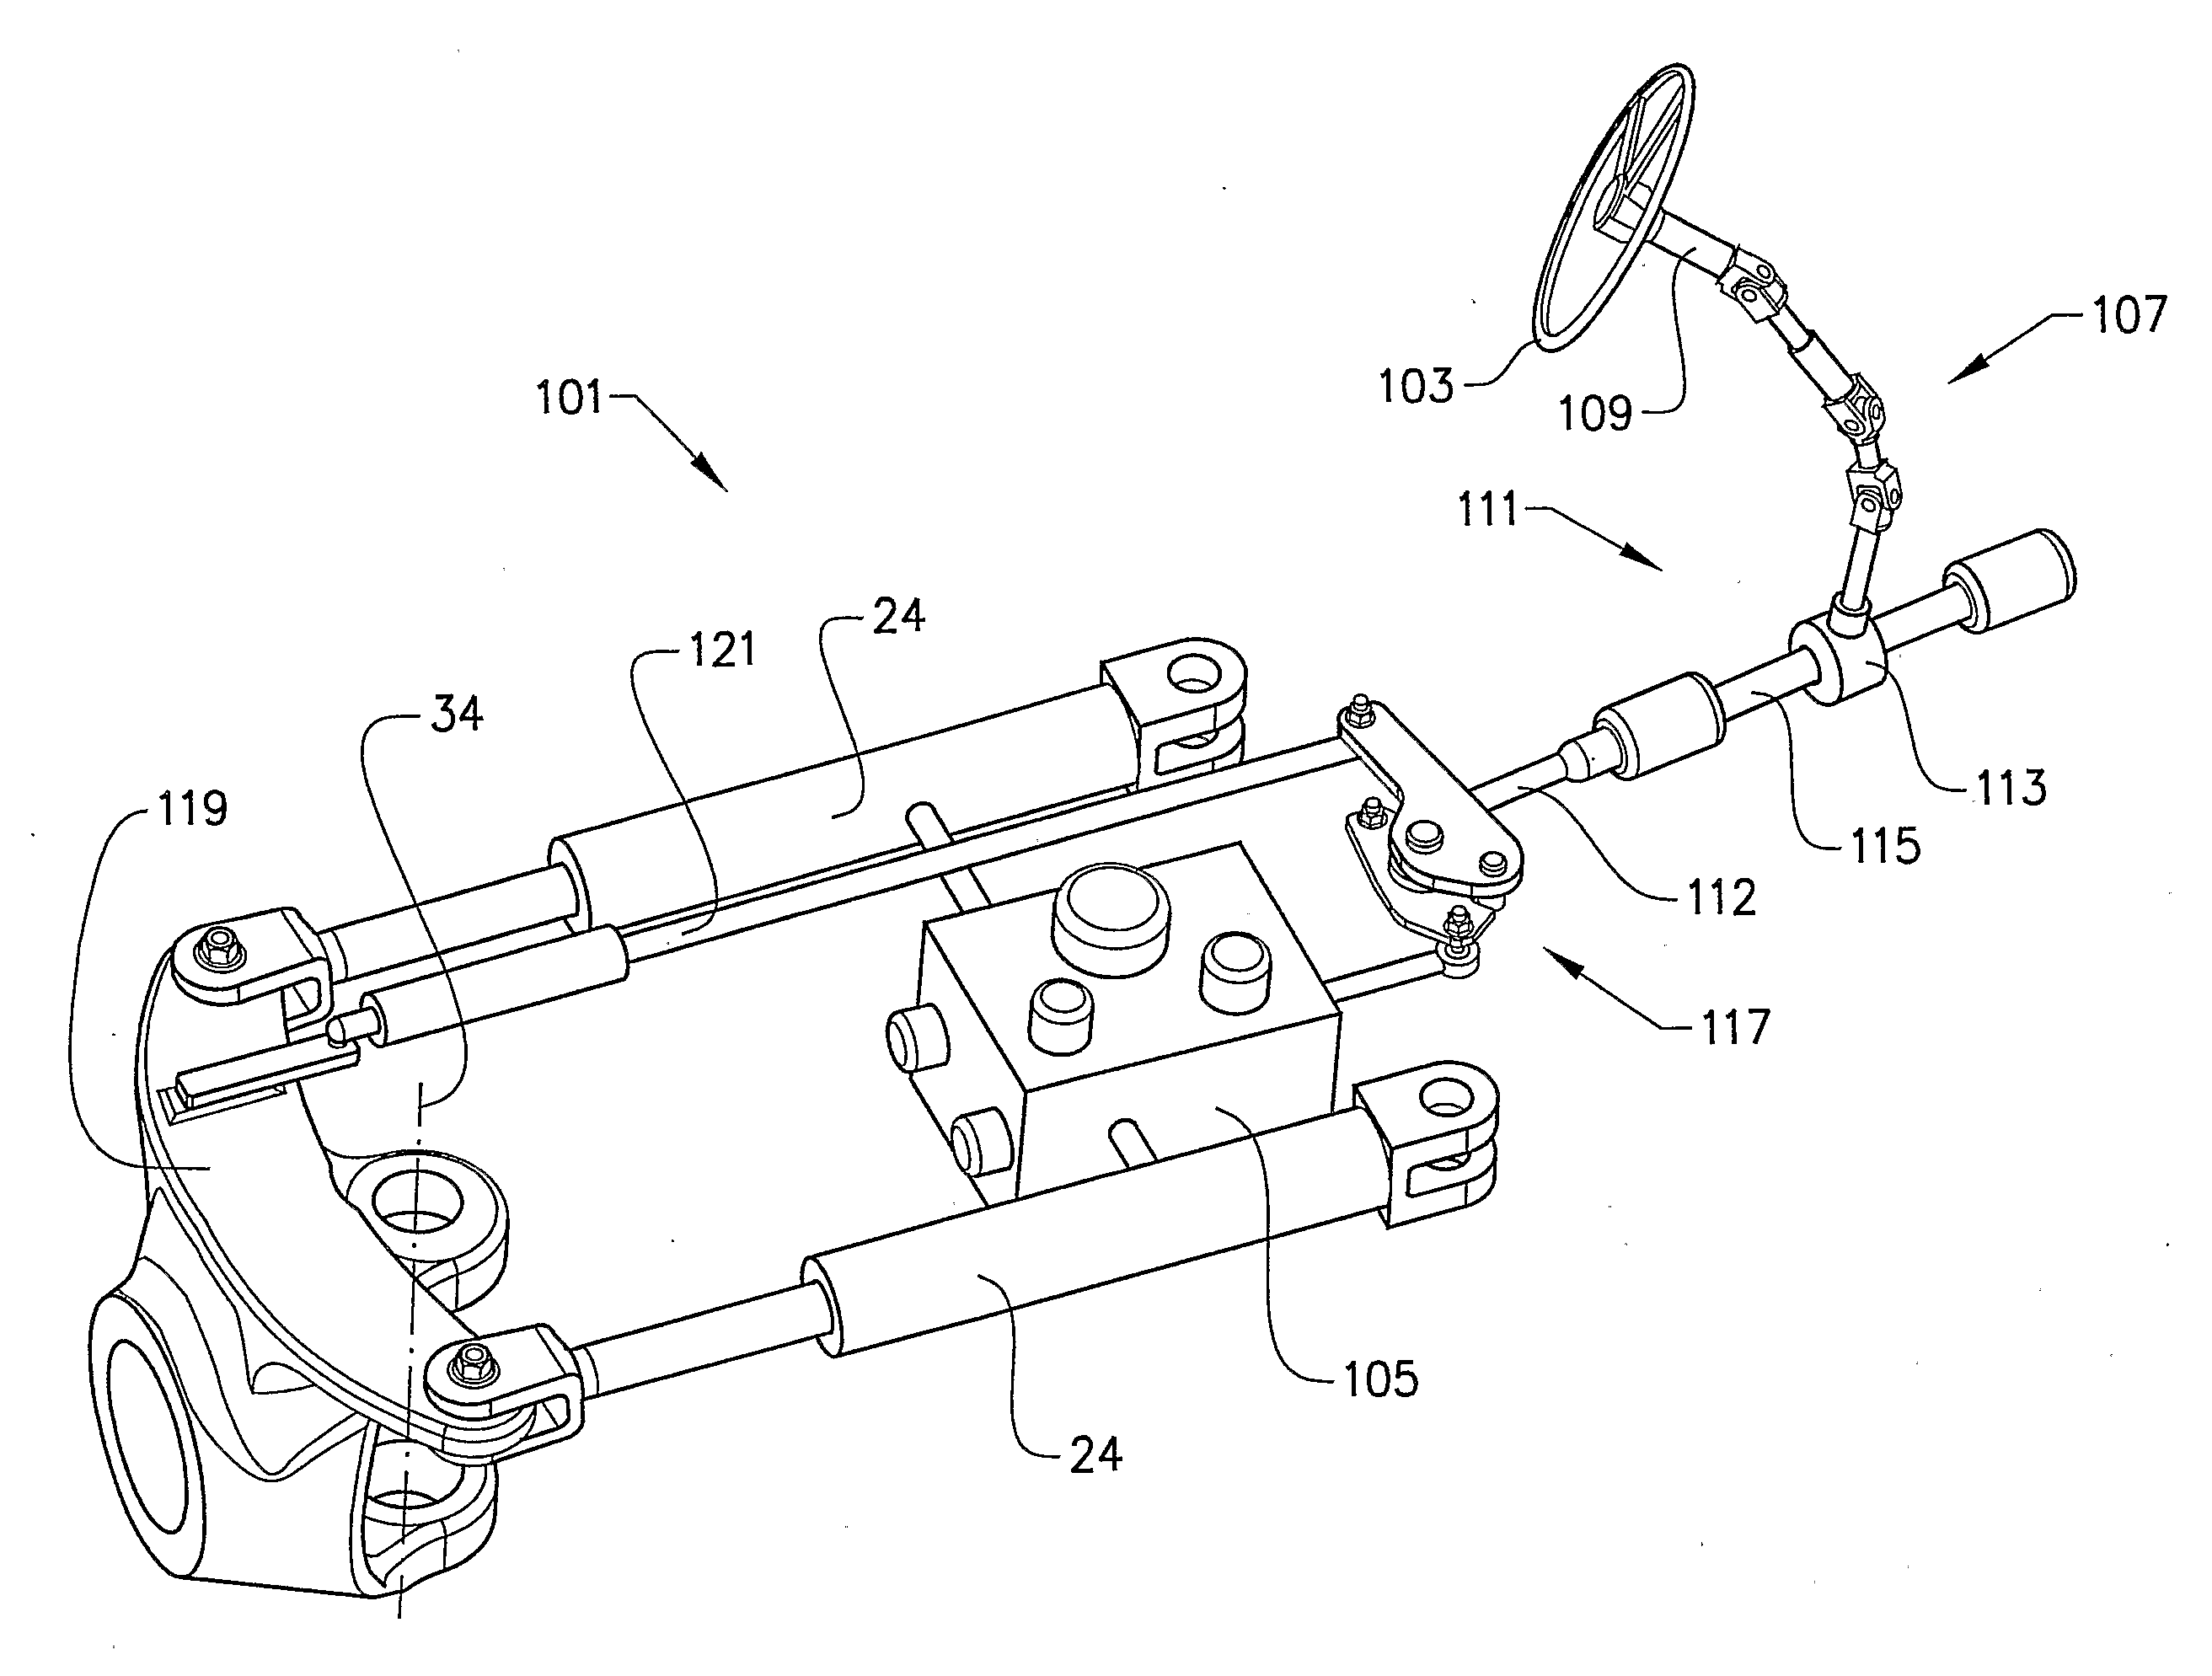 Straight motion assisting device for a work machine